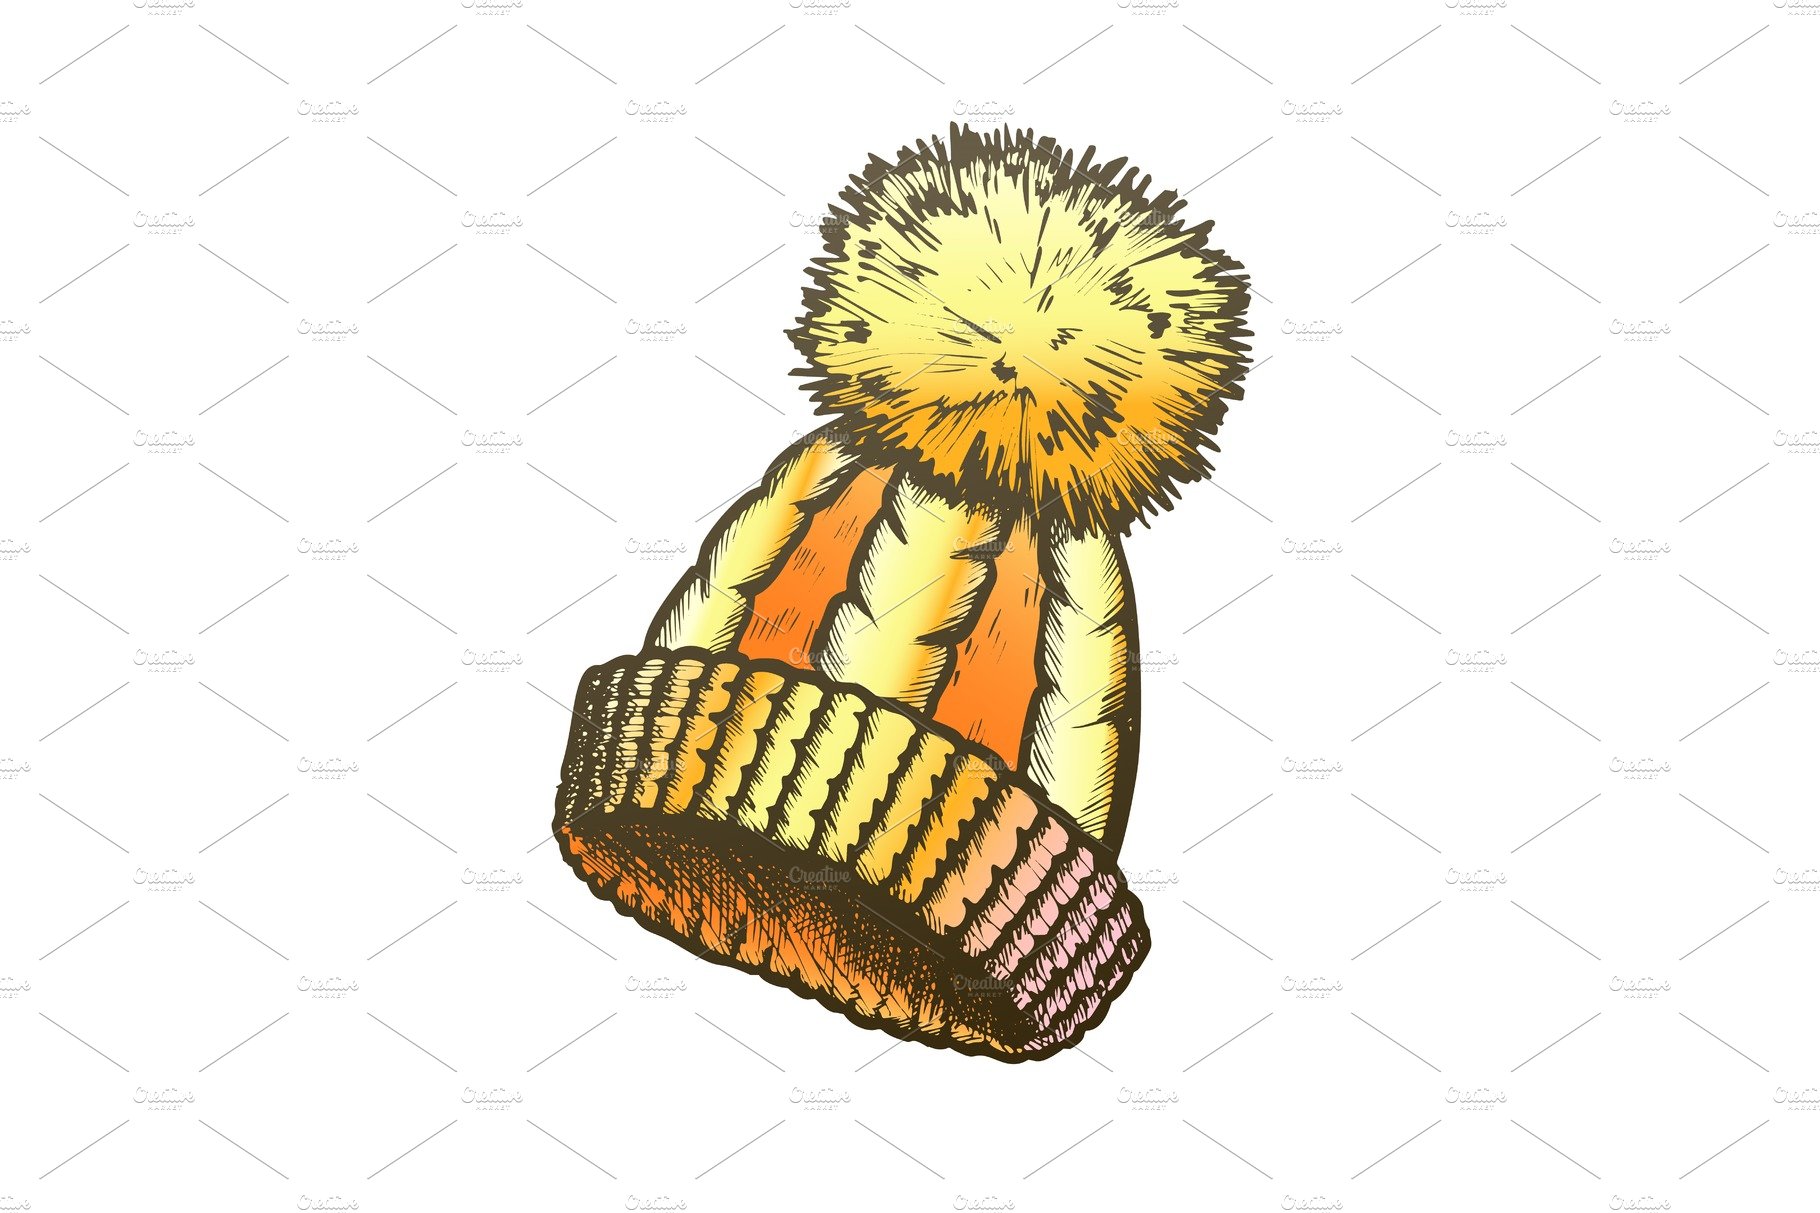 Winter Hat With Woolen Pompon Color cover image.